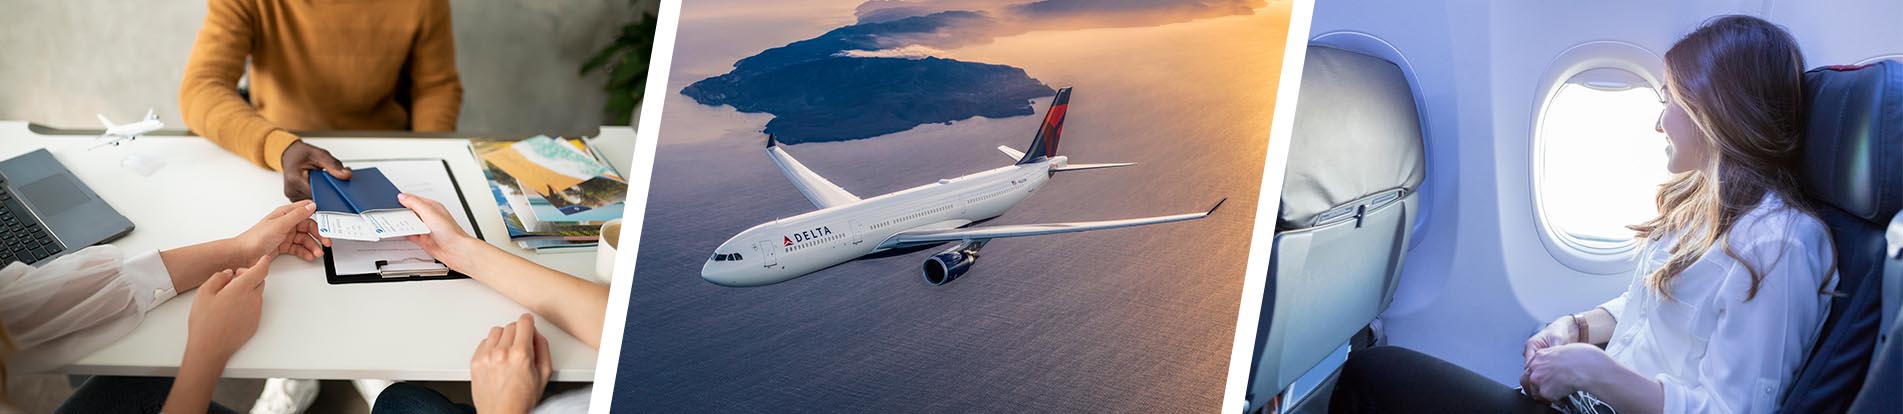 Delta One Experience By Booking Delta Airlines Tickets